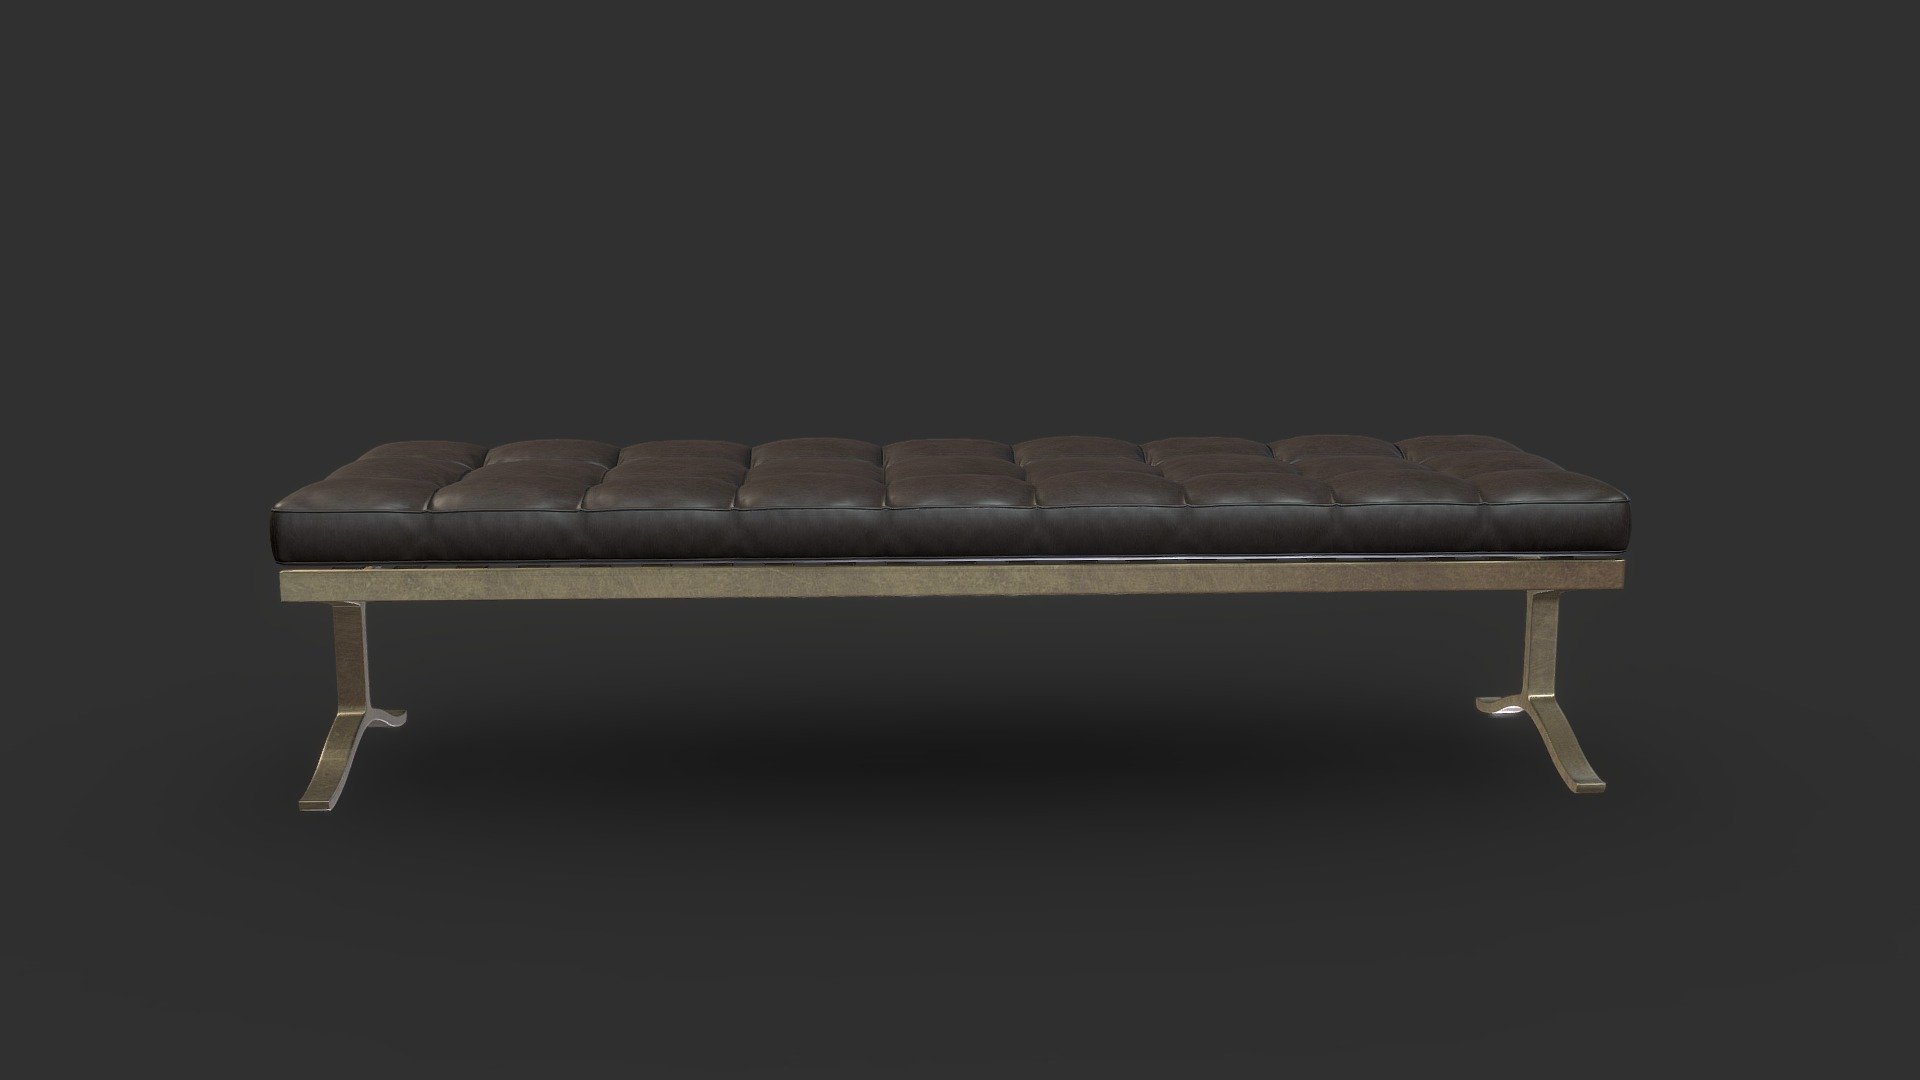 Brass And Leather Bench by Nicos Zographos 

Dimensions:

W 1778 x D 533 x H 431

Seat height: 431 mm

Model link: https://3dsky.org/3dmodels/show/brass_and_leather_bench

Tags: 1960s, modern, classic, bench, daybed, tufted, button, ottoman, chesterfield - Brass And Leather Bench - Buy Royalty Free 3D model by RC3D (@rc.3d) 3d model